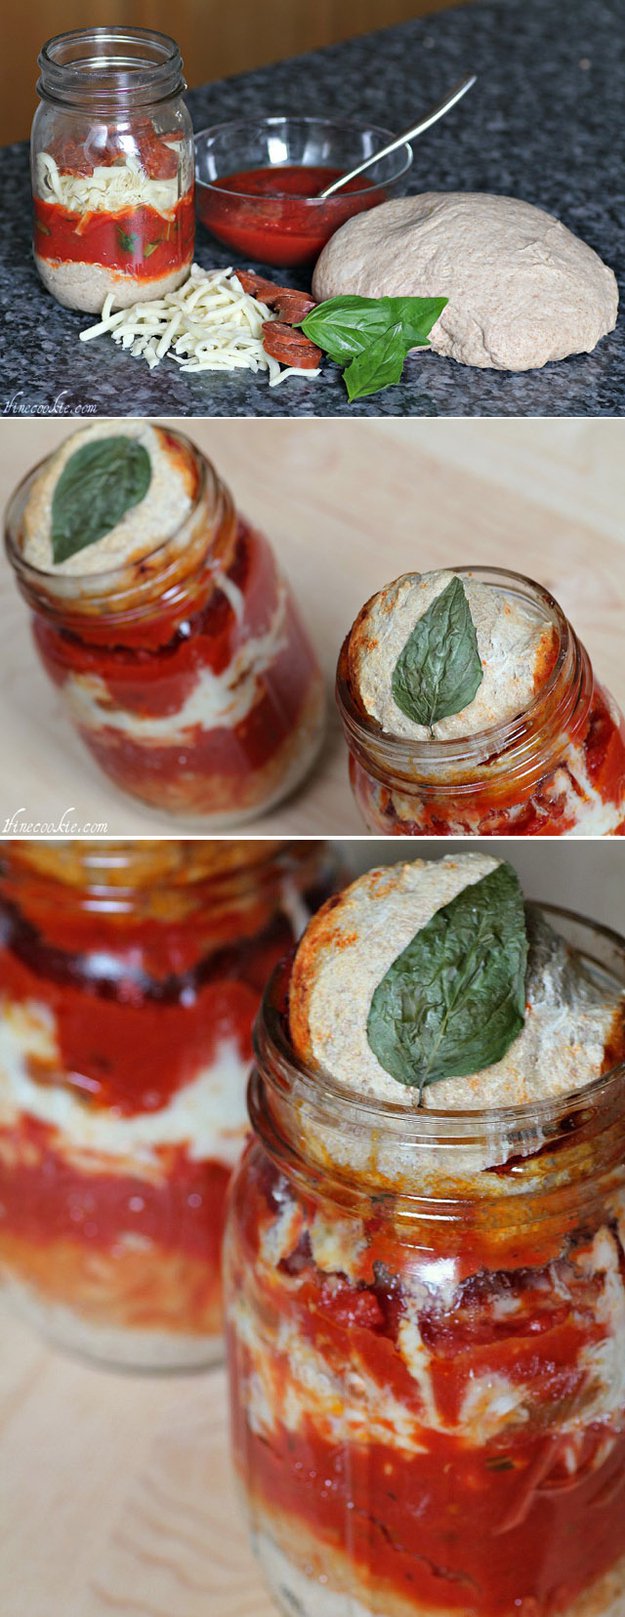 Pizza in a jar.